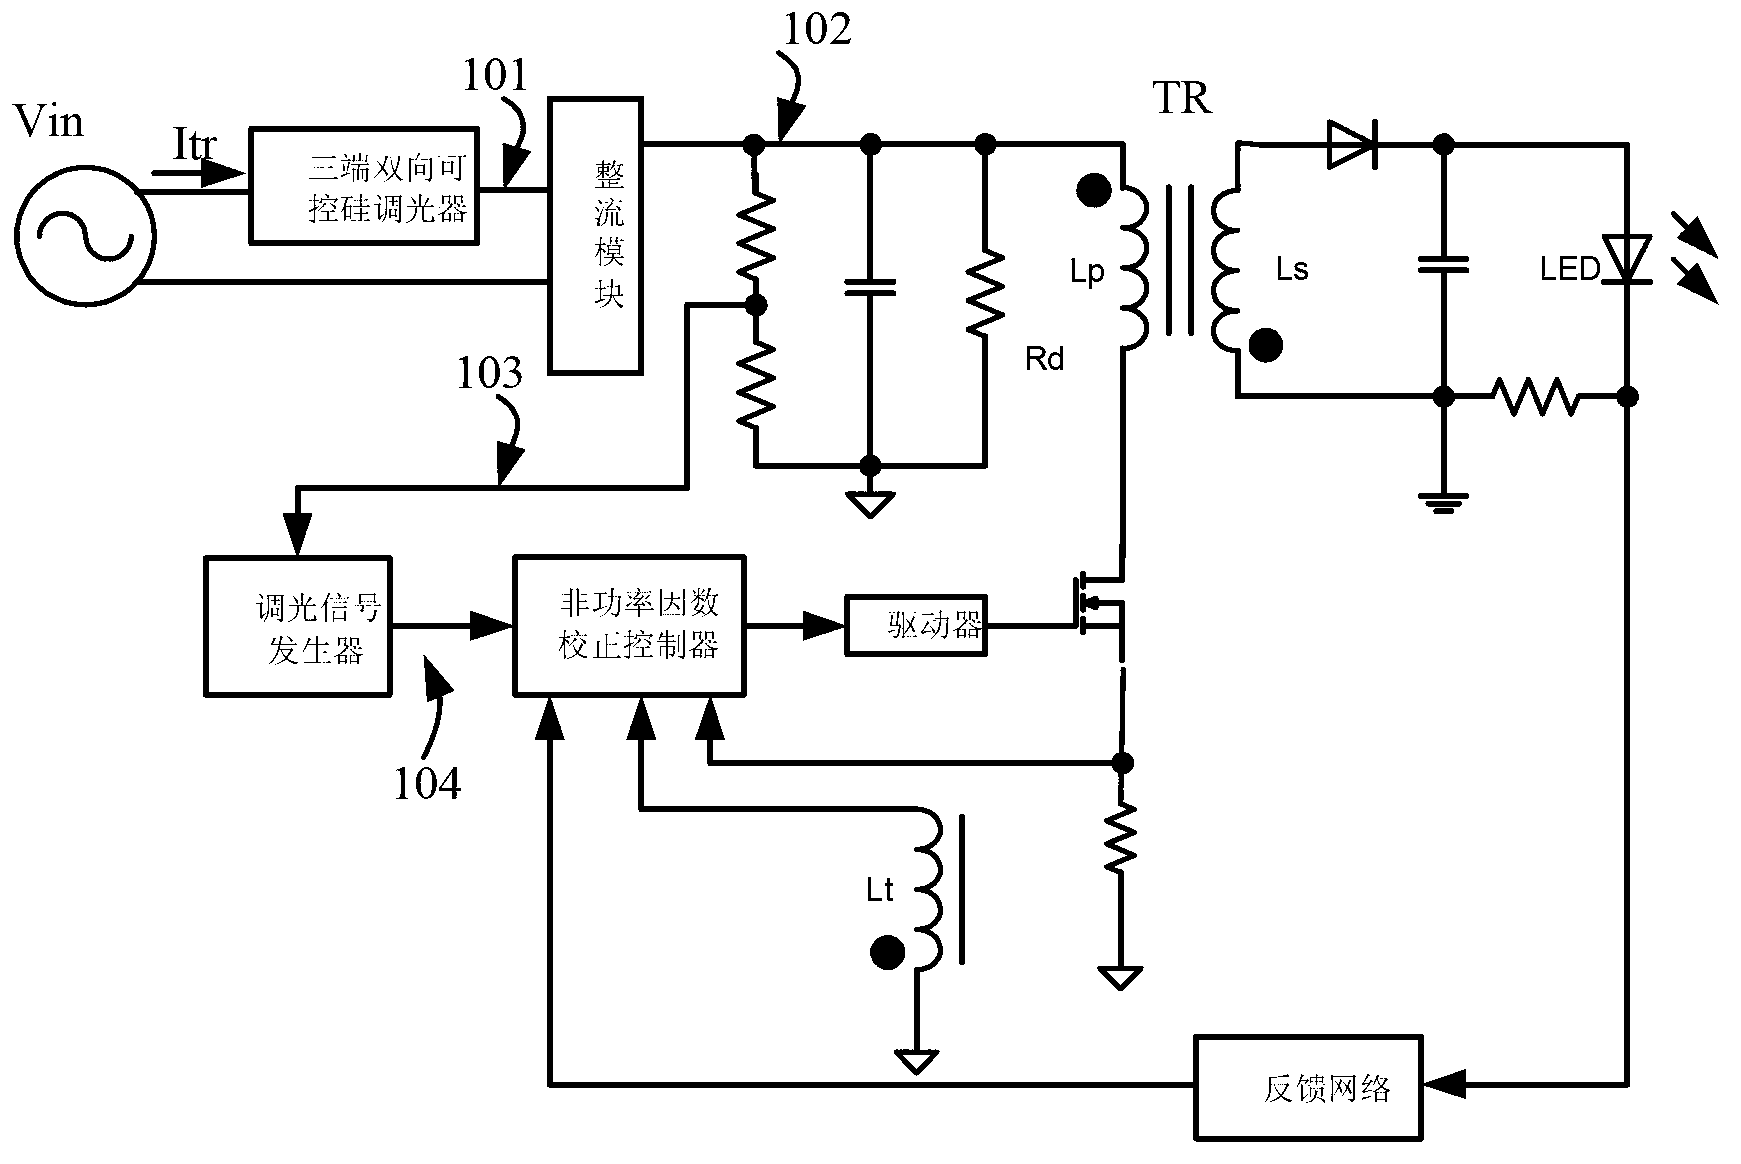 LED (Light Emitting Diode) drive circuit with dimming function and lamp